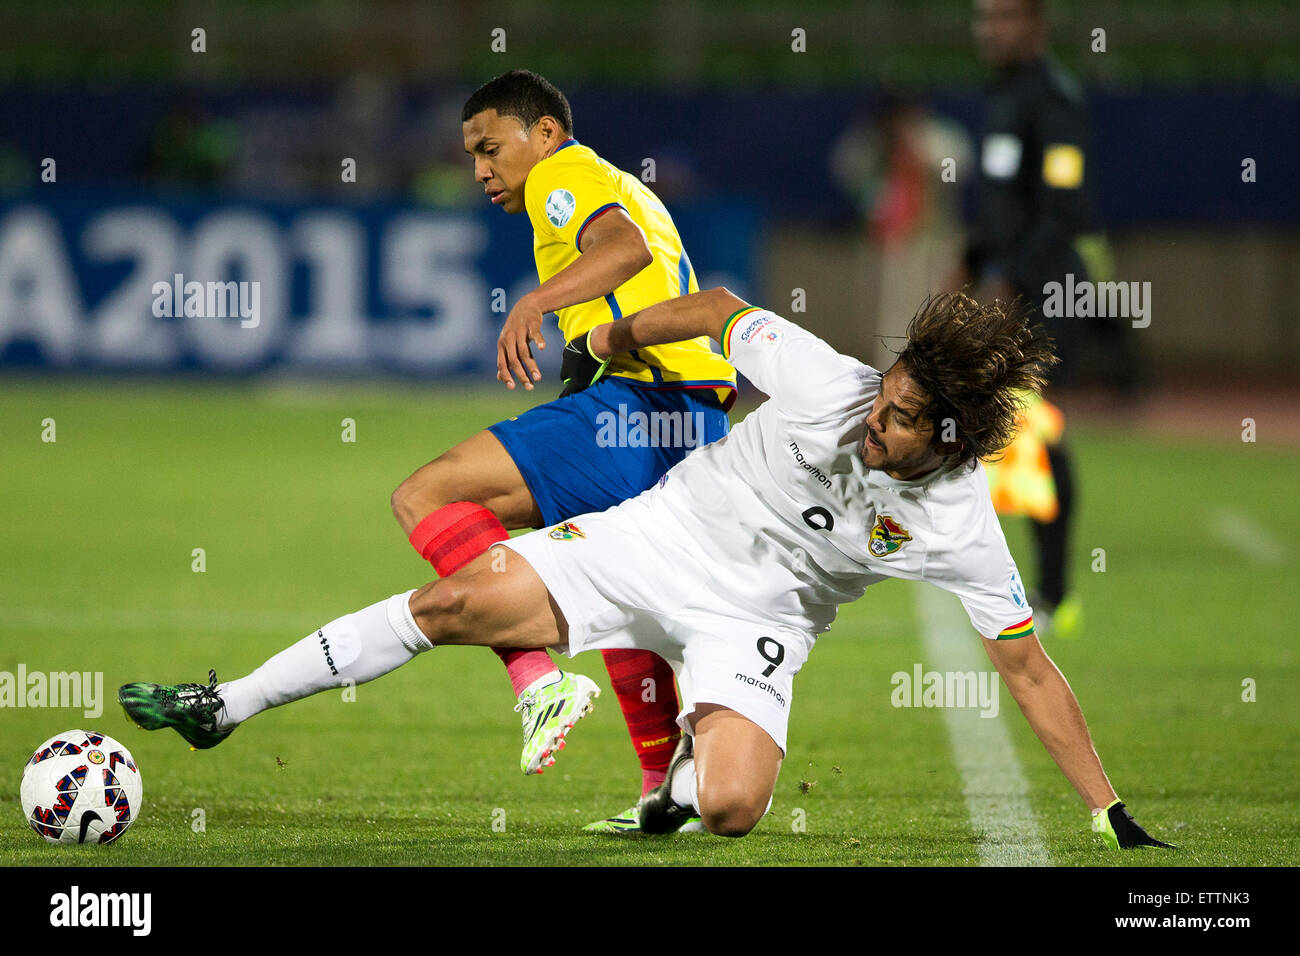 Valparaiso, Chile. 15th June, 2015. Jefferson Montero (L) of Ecuador vies for the ball with Marcelo Martins of Bolivia during the Group A match of the Copa America, held at the Elias Figueroa Brander stadium, in Valparaiso, Chile, on June 15, 2015. Bolivia won 3-2. © Luis Echeverria/Xinhua/Alamy Live News Stock Photo